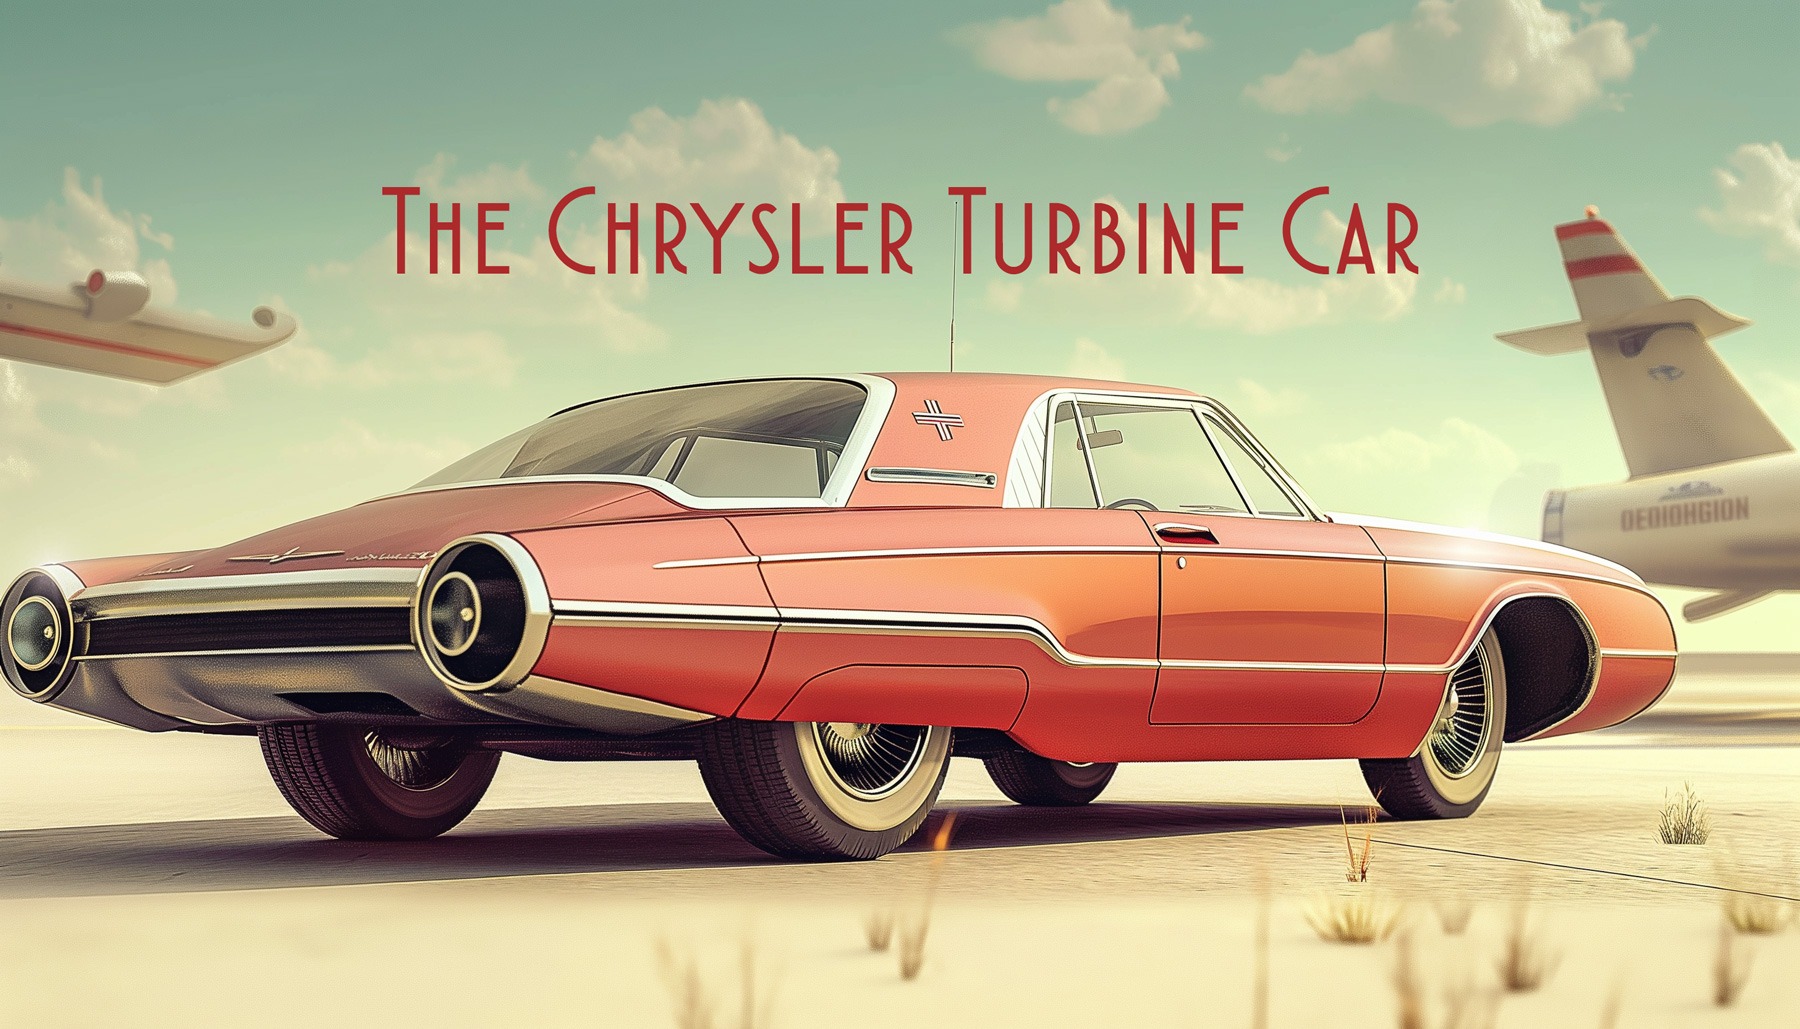 Automobiles you don't see everyday... - Page 11 Chrysler-turbine-car-banner